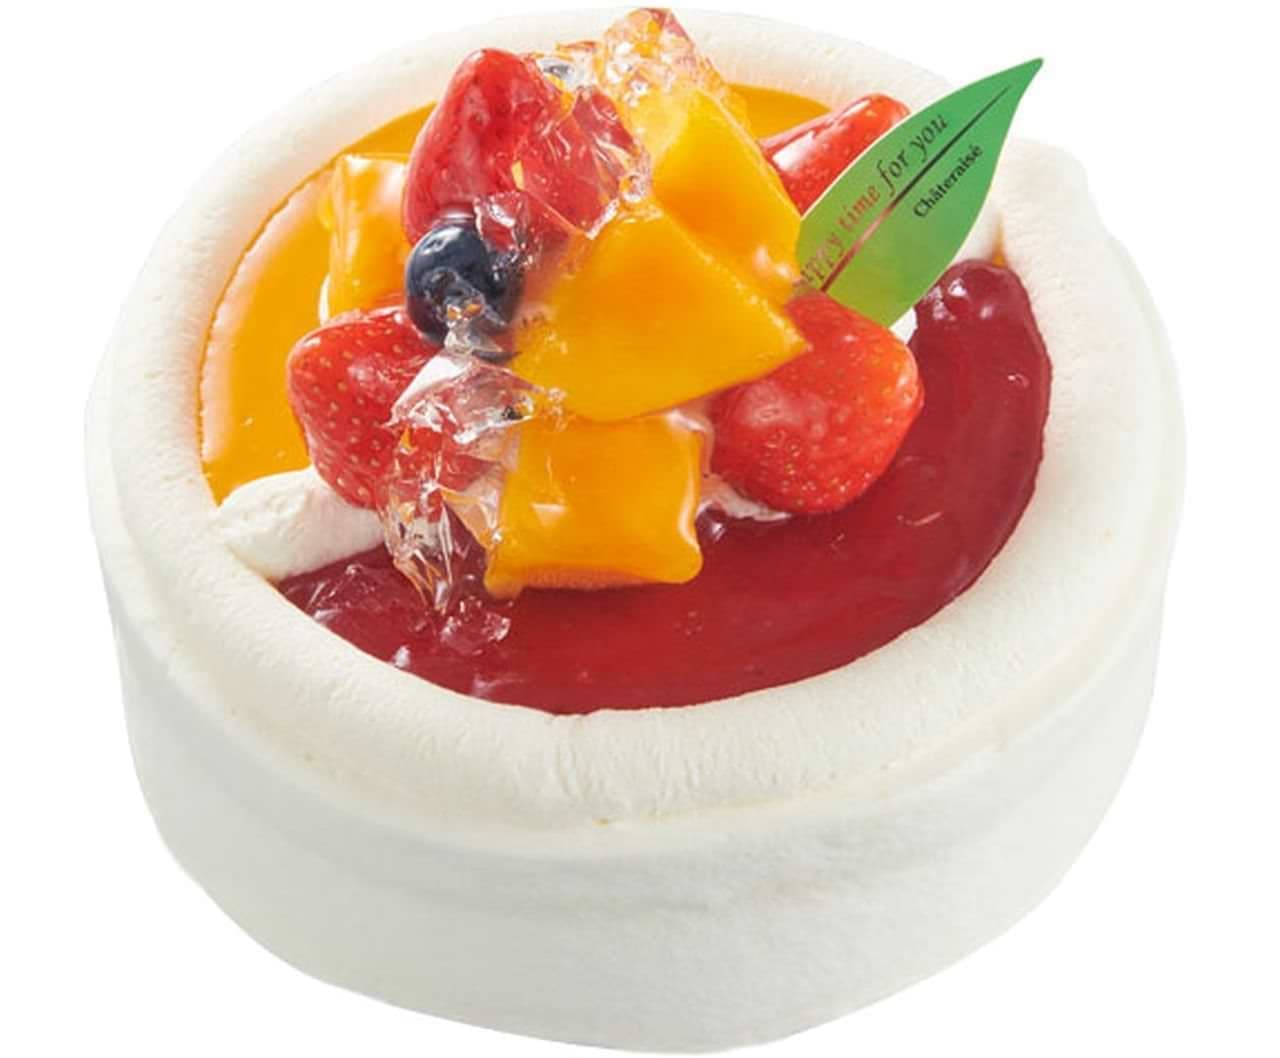 Chateraise "Strawberry and Apple Mango Souffle Cheese Decoration"